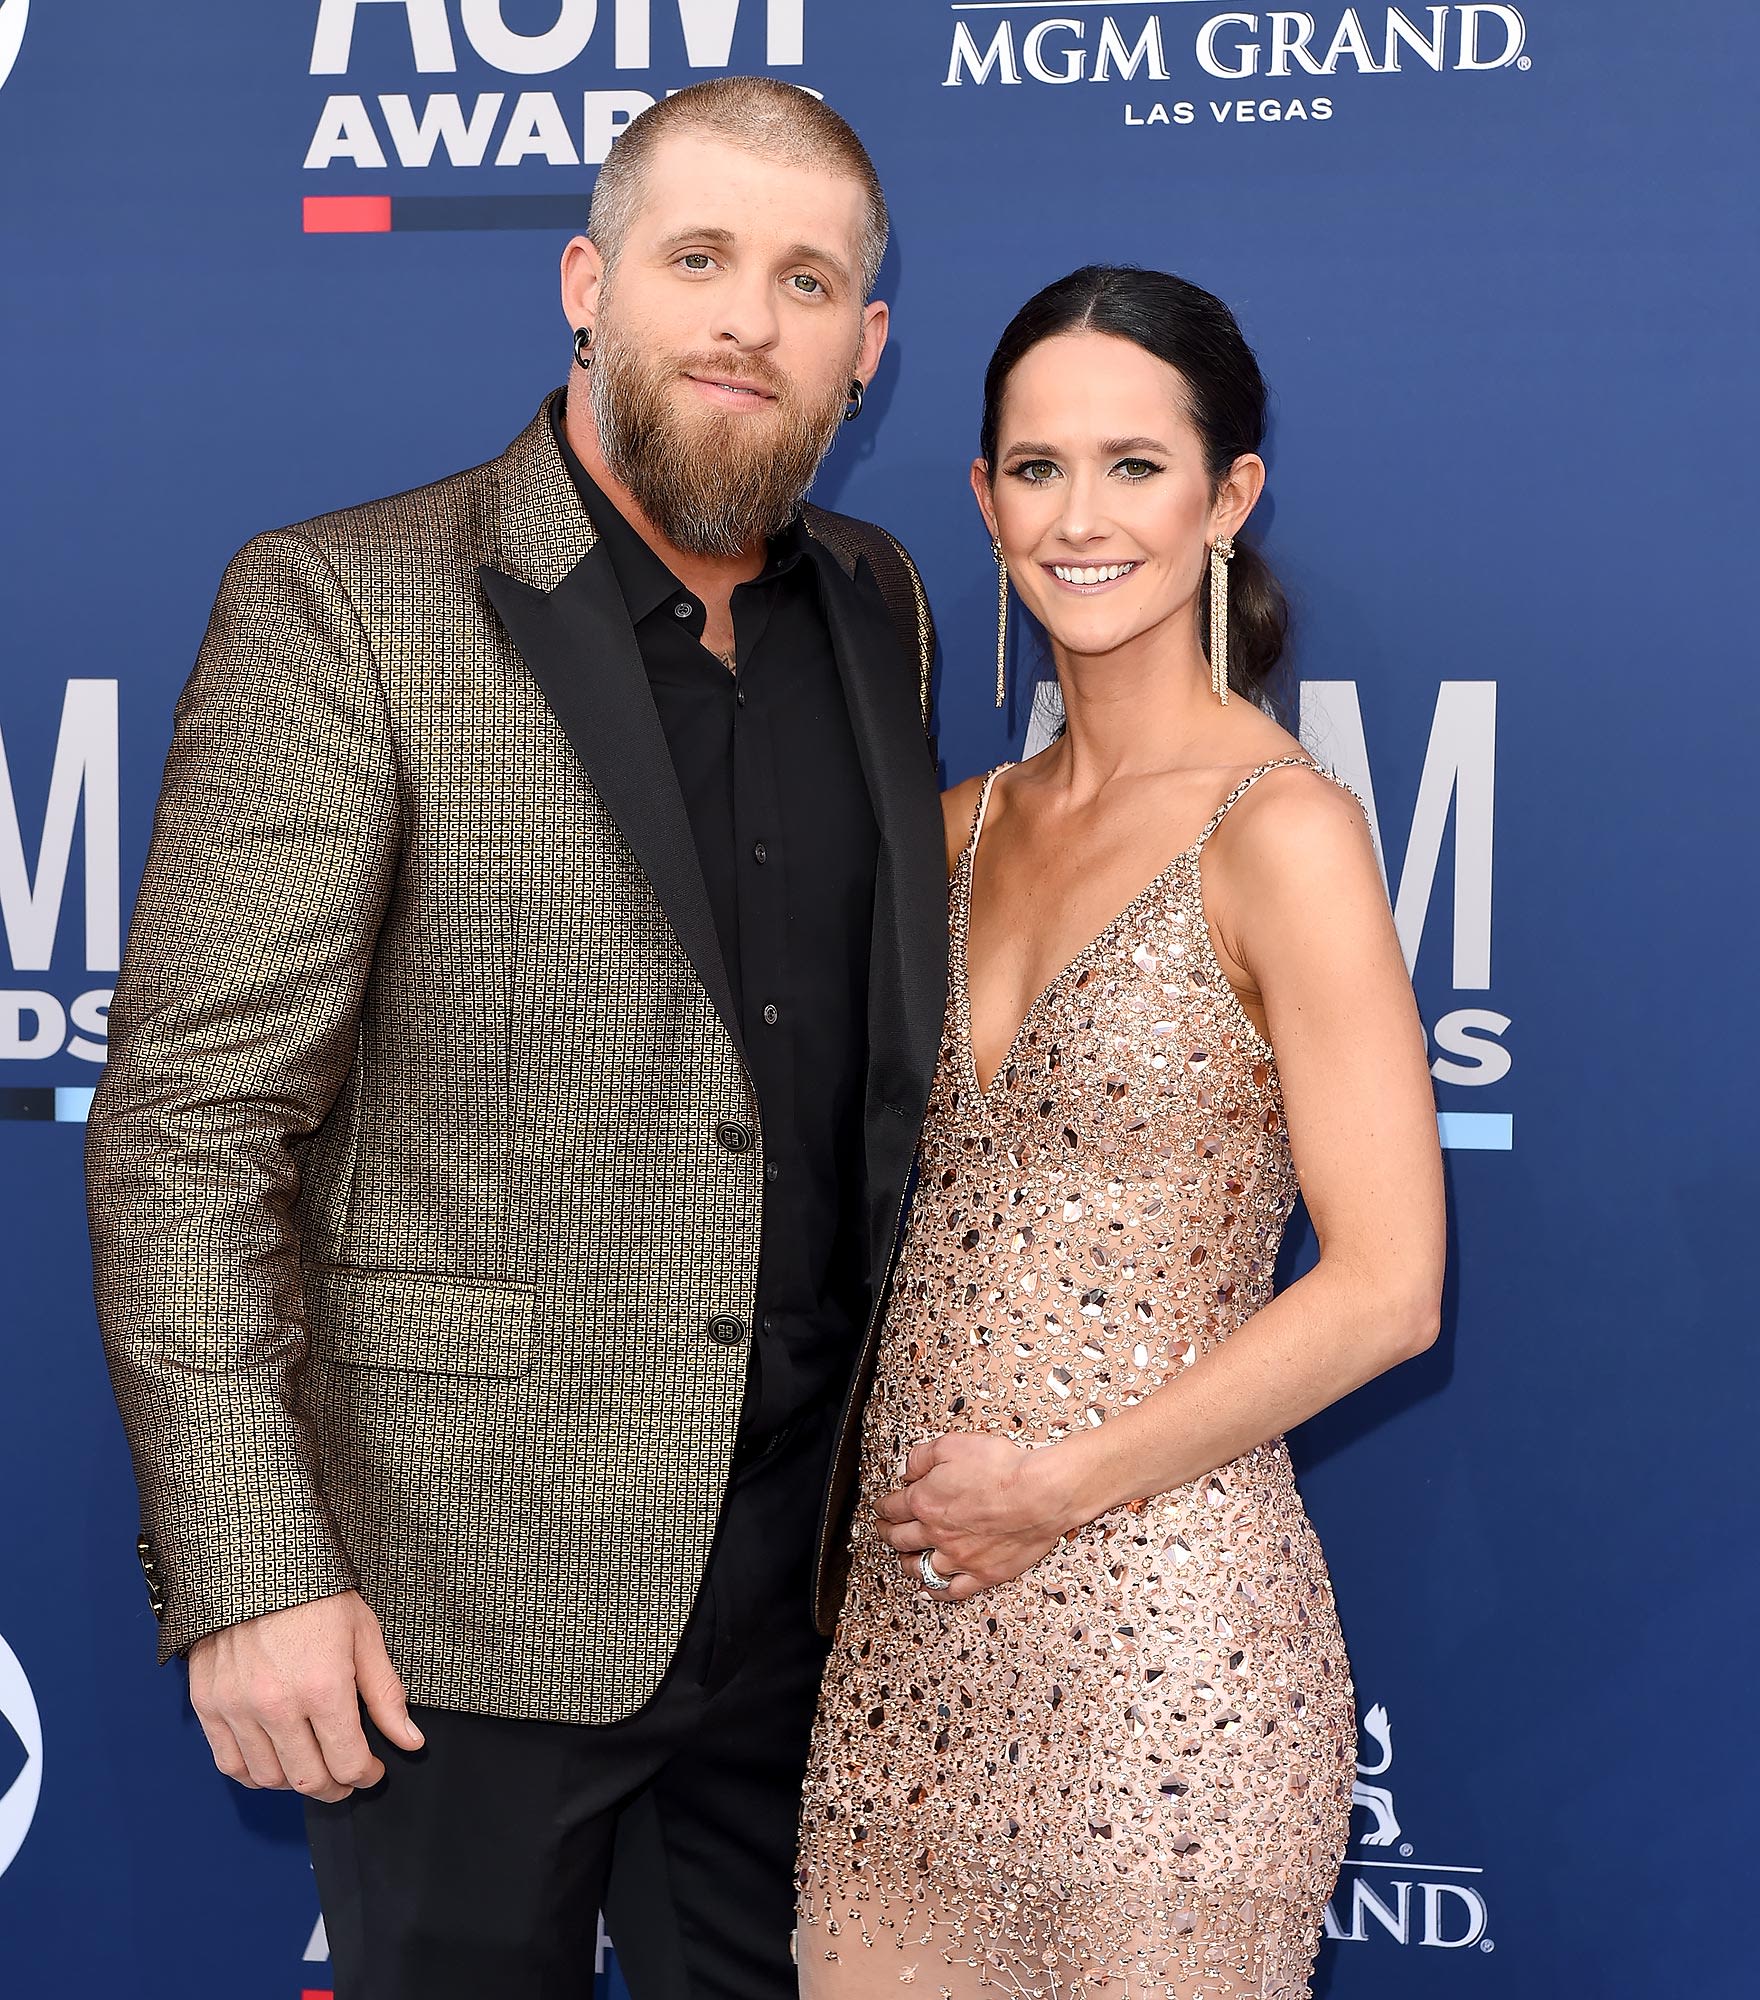 Country Music Star Brantley Gilbert and Wife Amber Are Expecting Baby No. 3